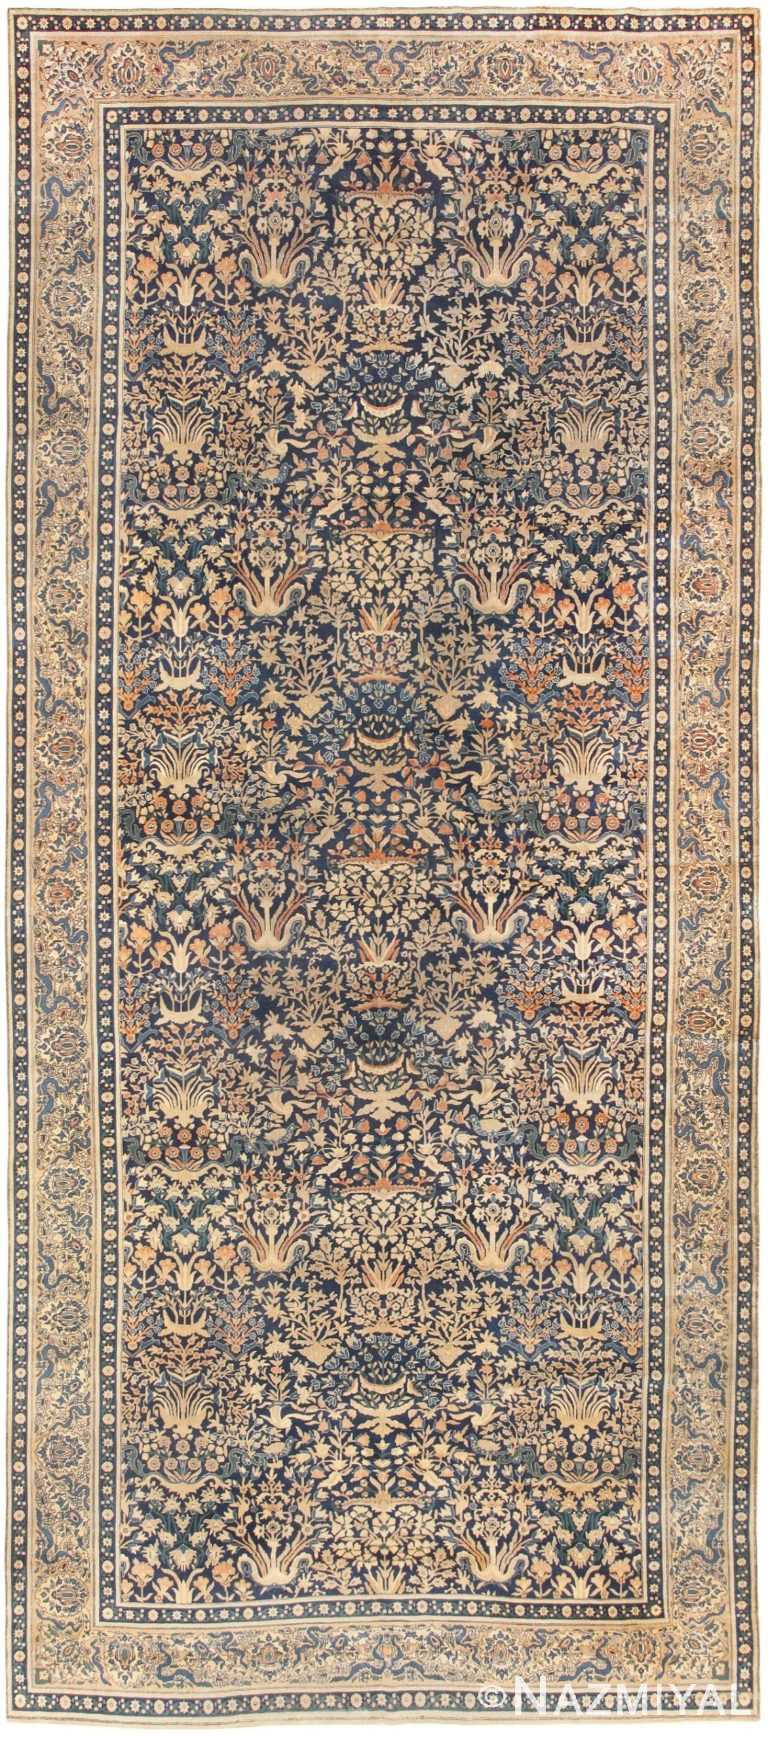 Antique Indian Agra Rug 40572 Detail/Large View